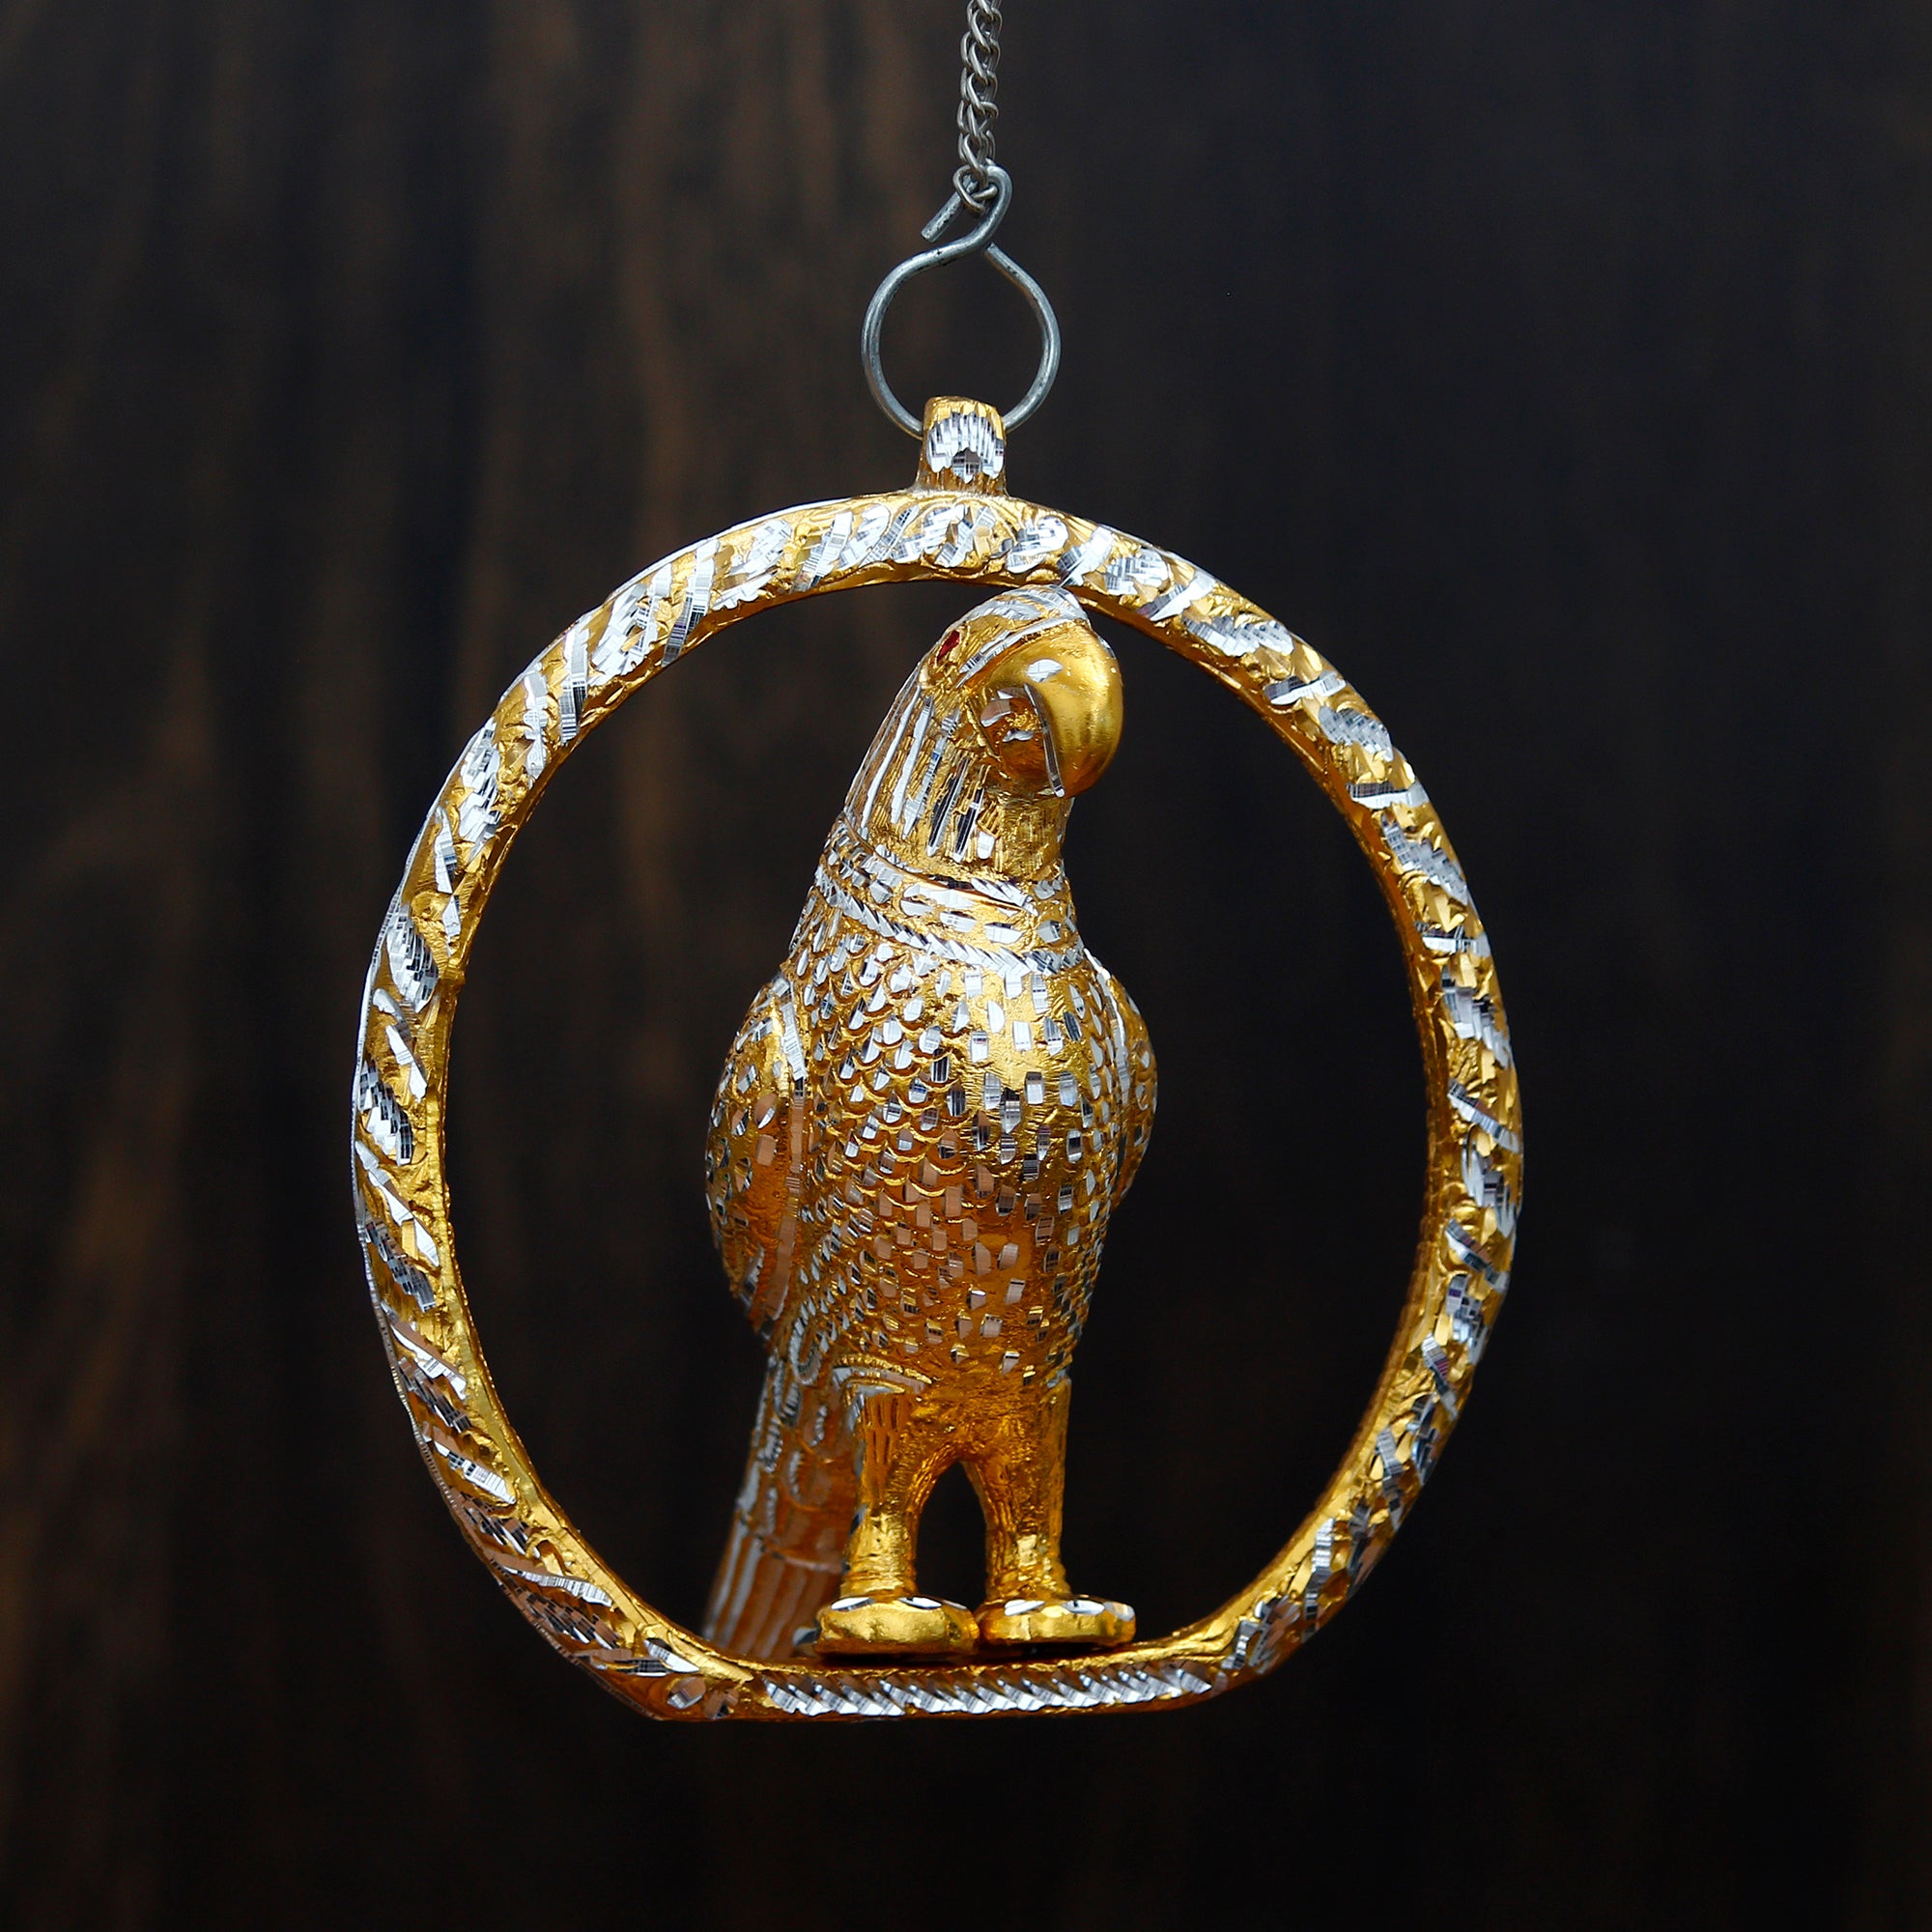 Metal Carved Golden Parrot Statue Decorative Wall Hanging Showpiece with Chain 4